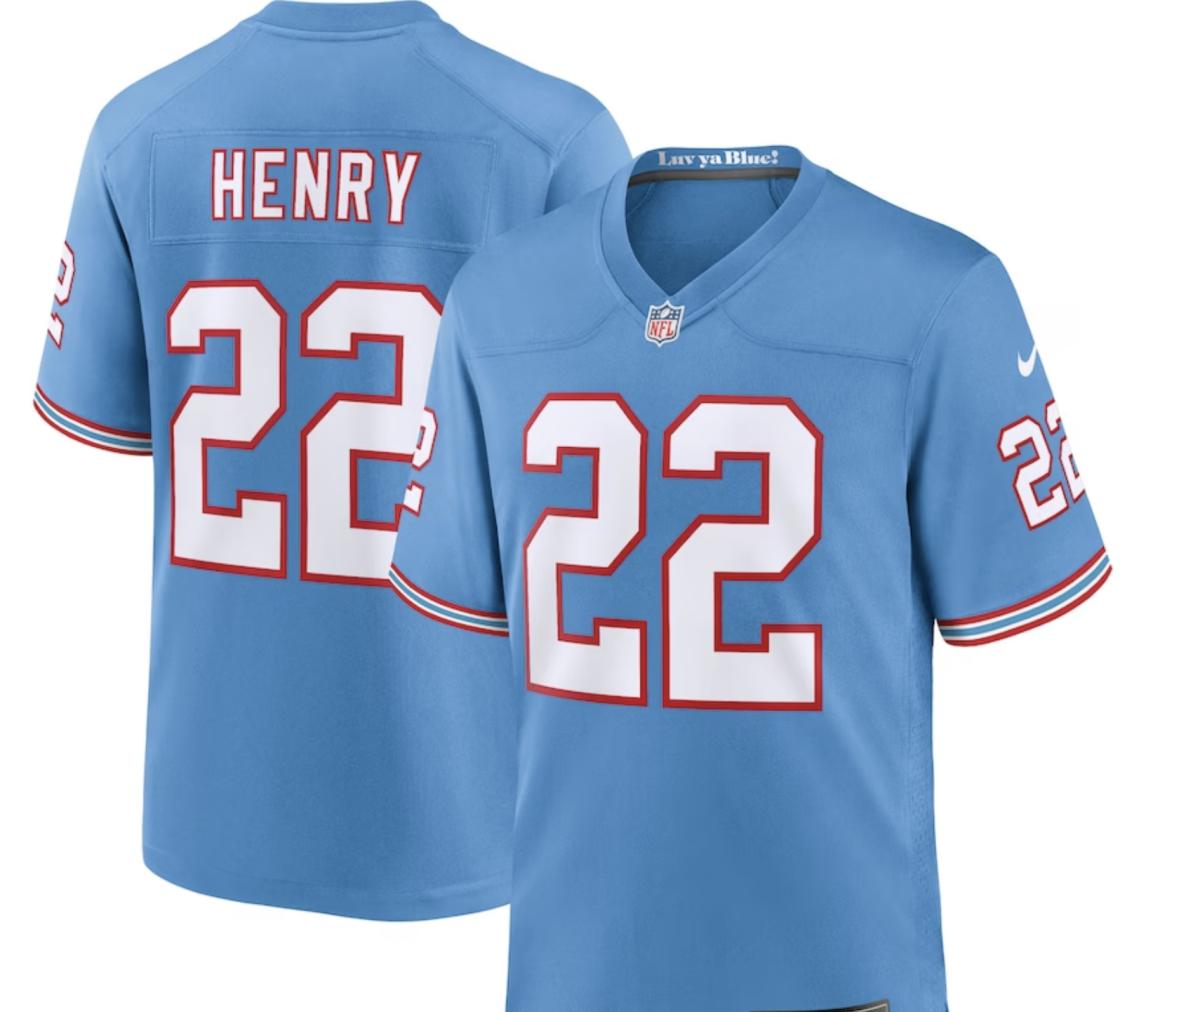 Where to buy Tennessee Titans 'Oilers' Throwback Jersey - FanNation